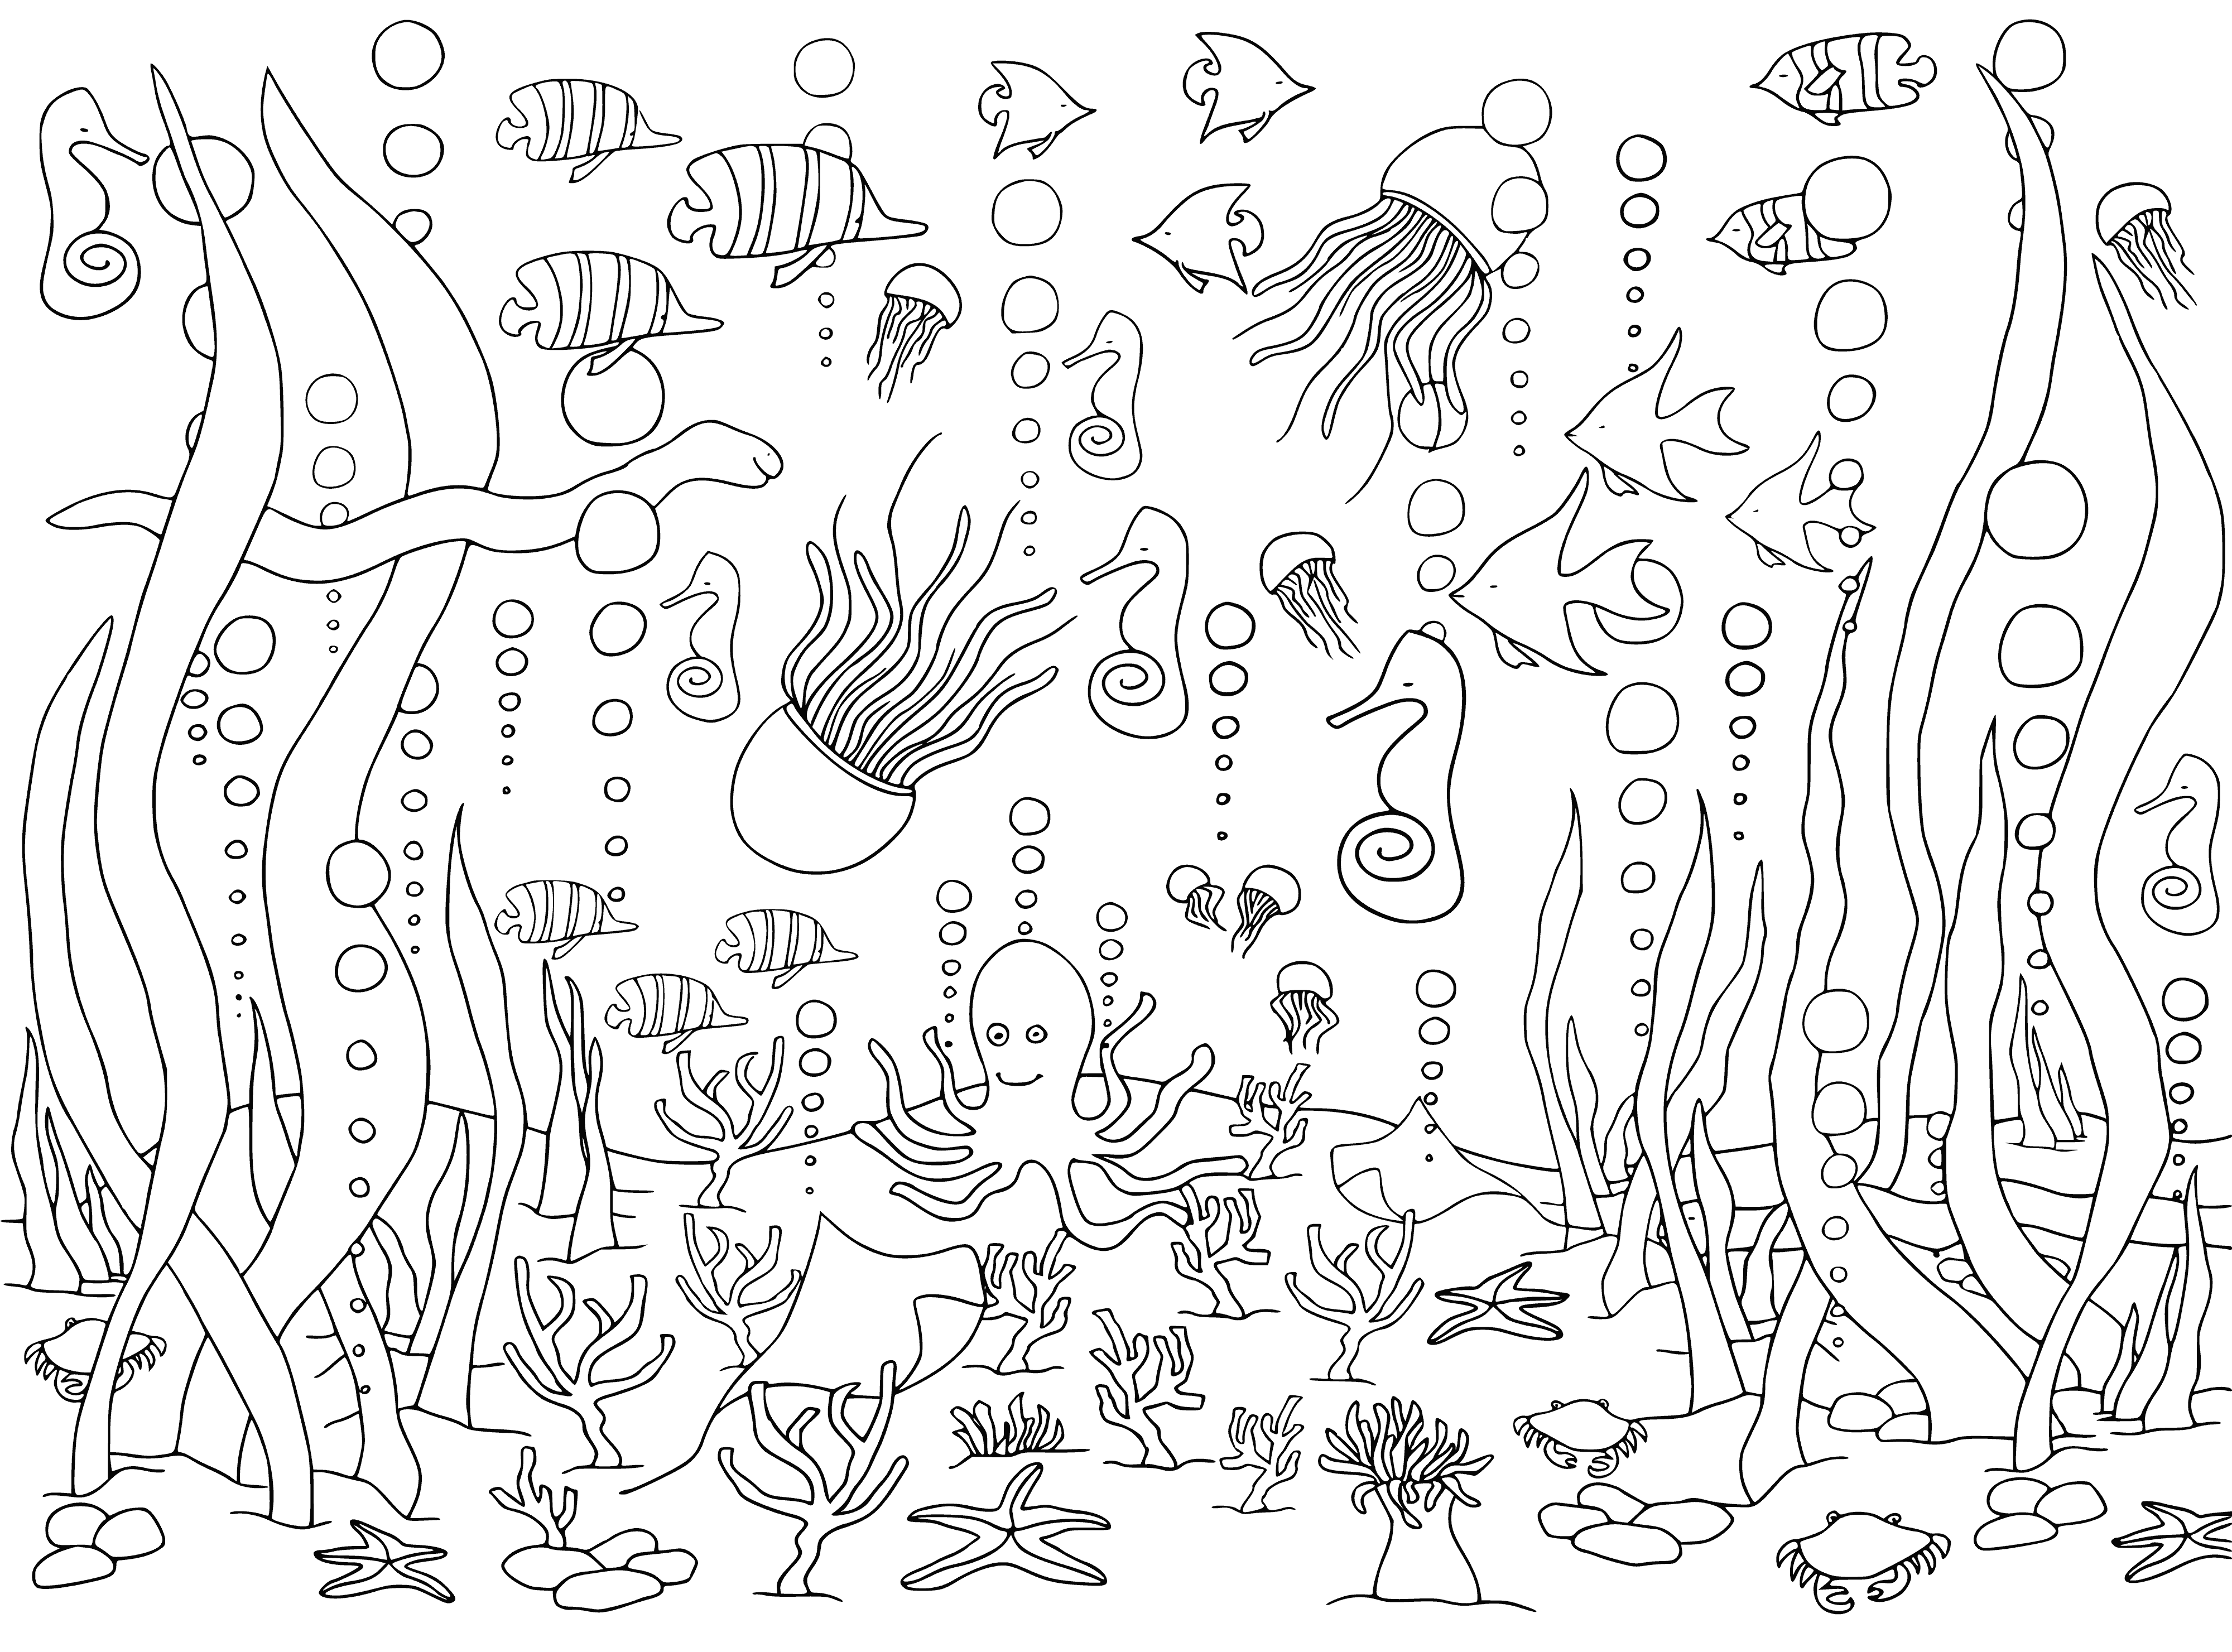 coloring page: Large beige octopus with 8 dark brown legs + many fish in a deep blue background.